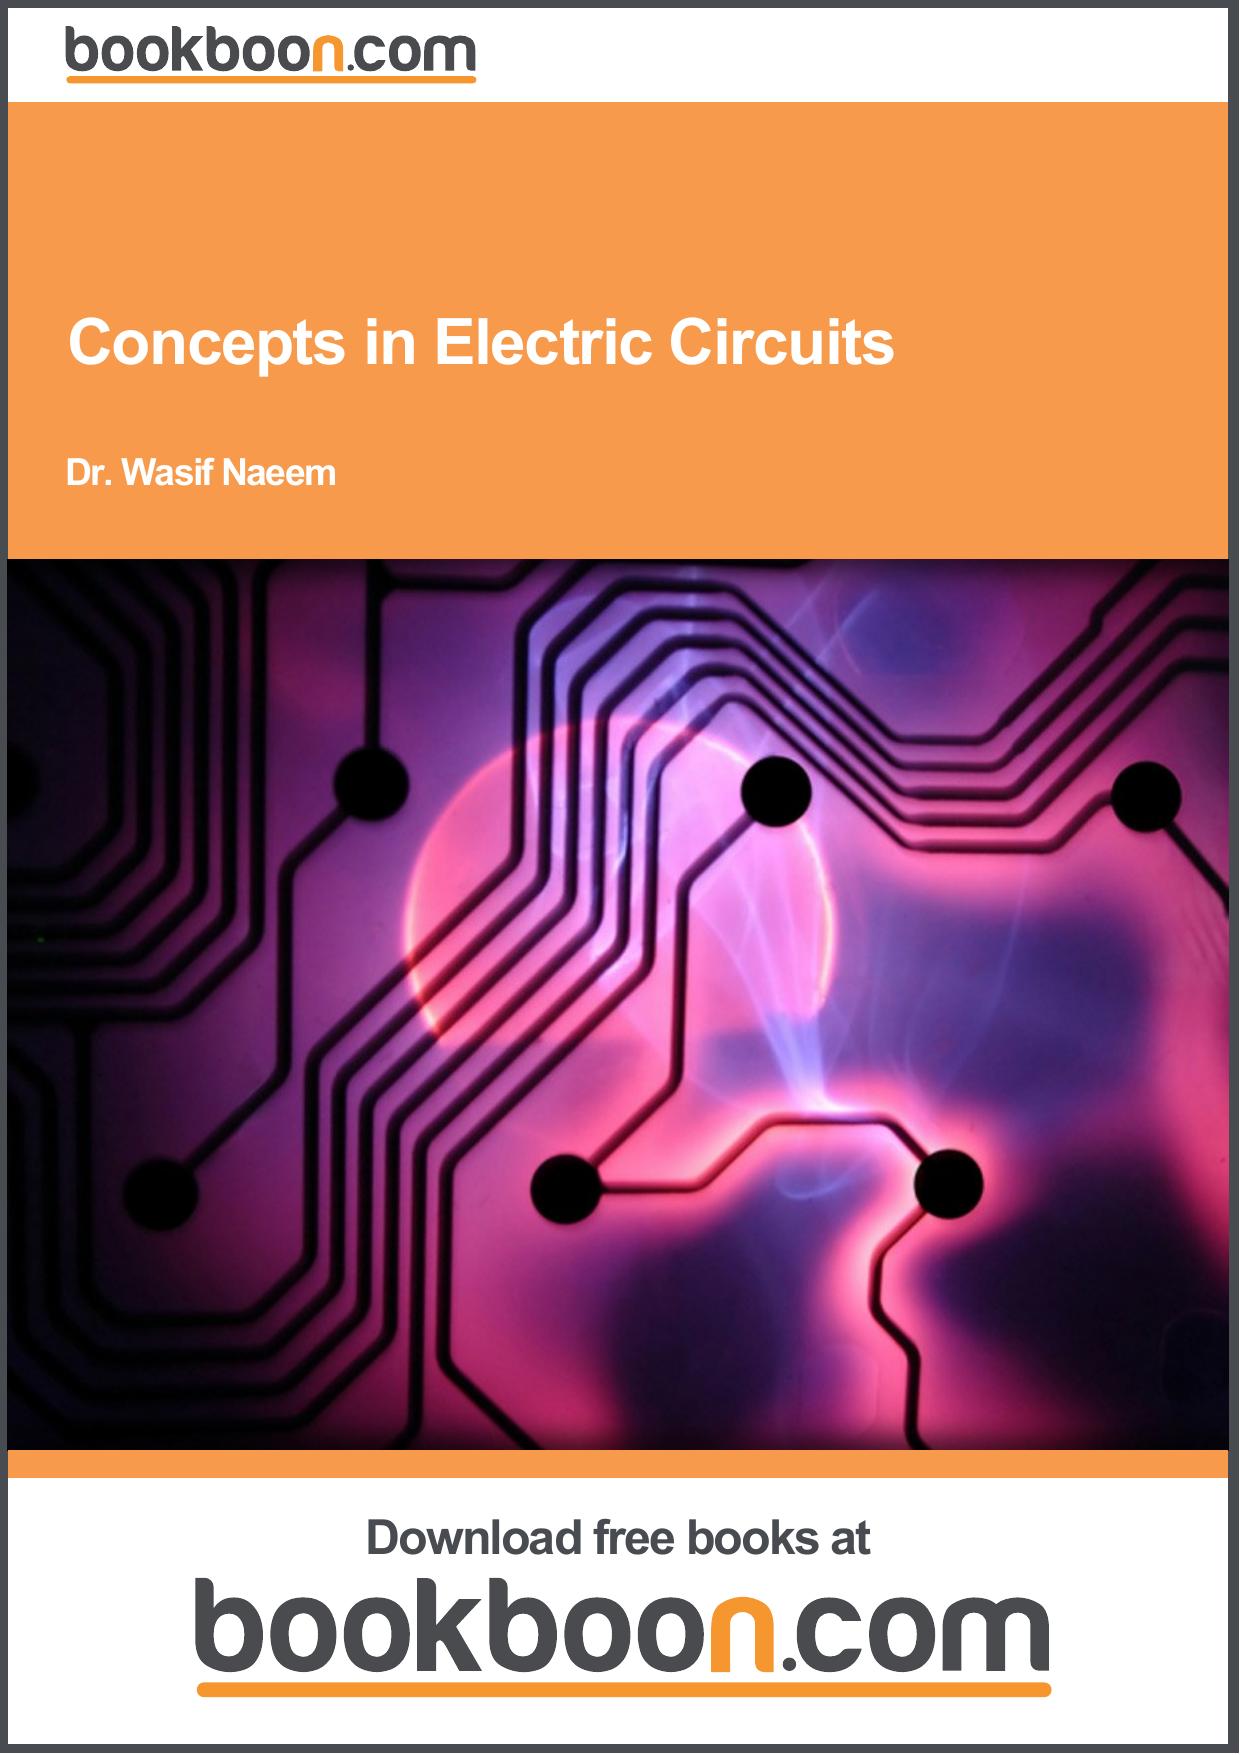 Concepts in Electric Circuits